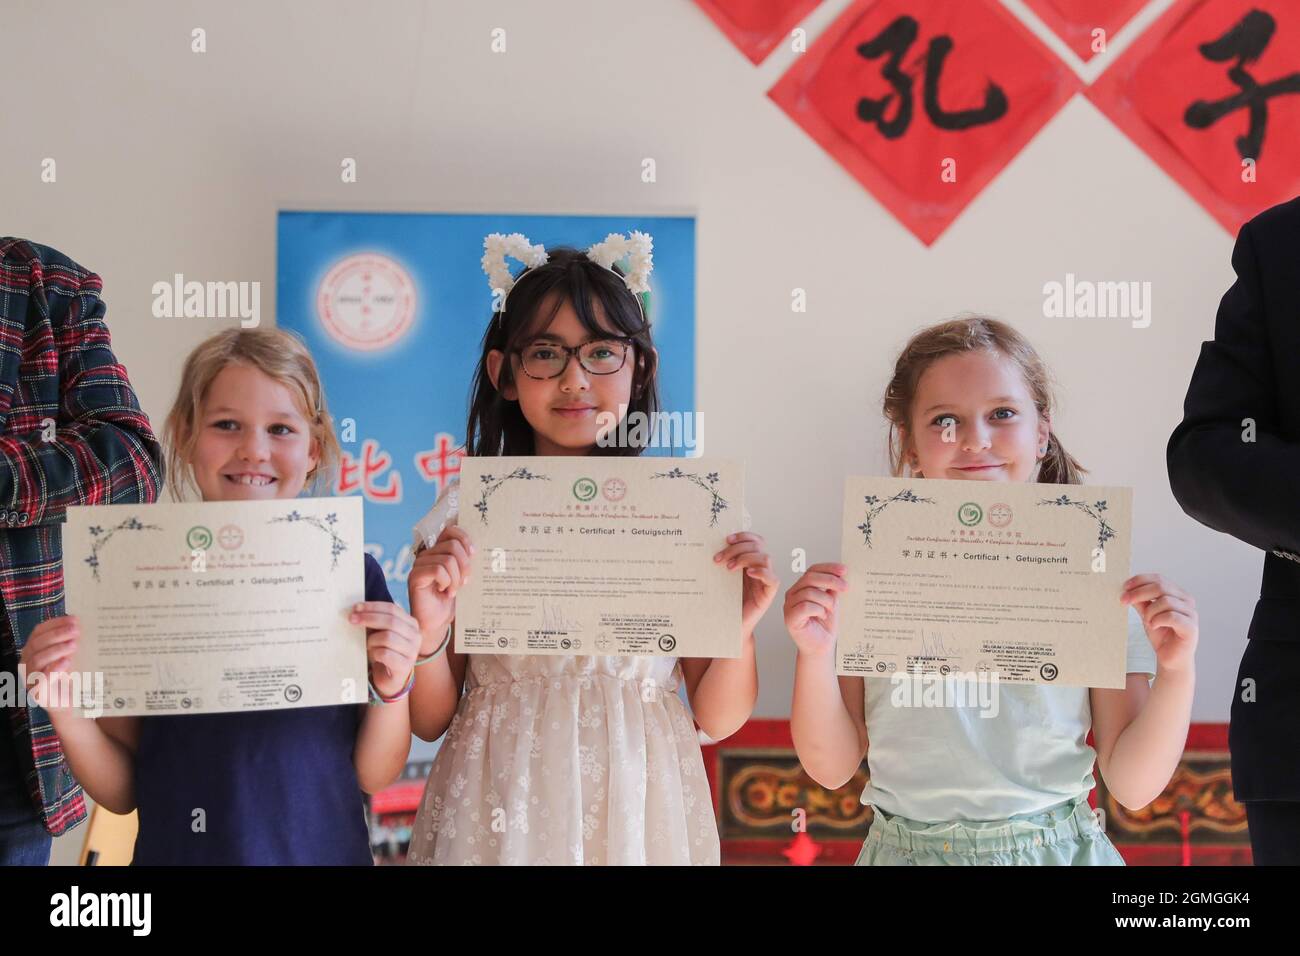 Brussels, Belgium. 18th Sep, 2021. Students hold their Chinese learning certificates during a ceremony at the Confucius Institute in Brussels, Belgium, on Sept. 18, 2021. The Confucius Institute in Brussels held an open day on Saturday, with activities like paper cutting, the game of go, and Qigong, attracting visitors to get a taste of the Chinese culture. Credit: Zheng Huansong/Xinhua/Alamy Live News Stock Photo